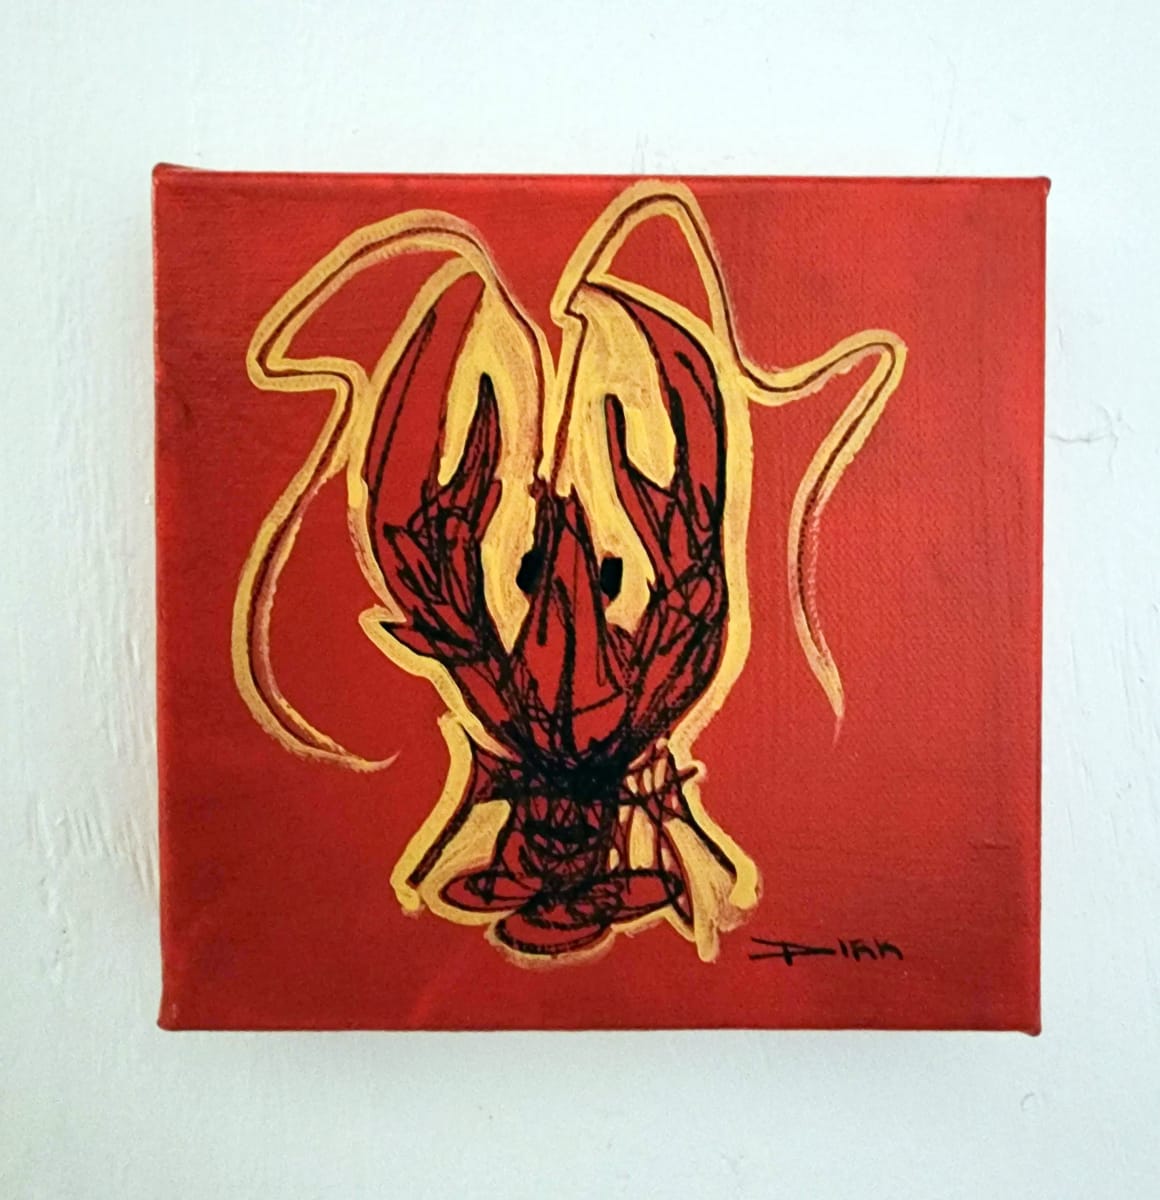 Crawfish on canvas #3 by Dirk Guidry 